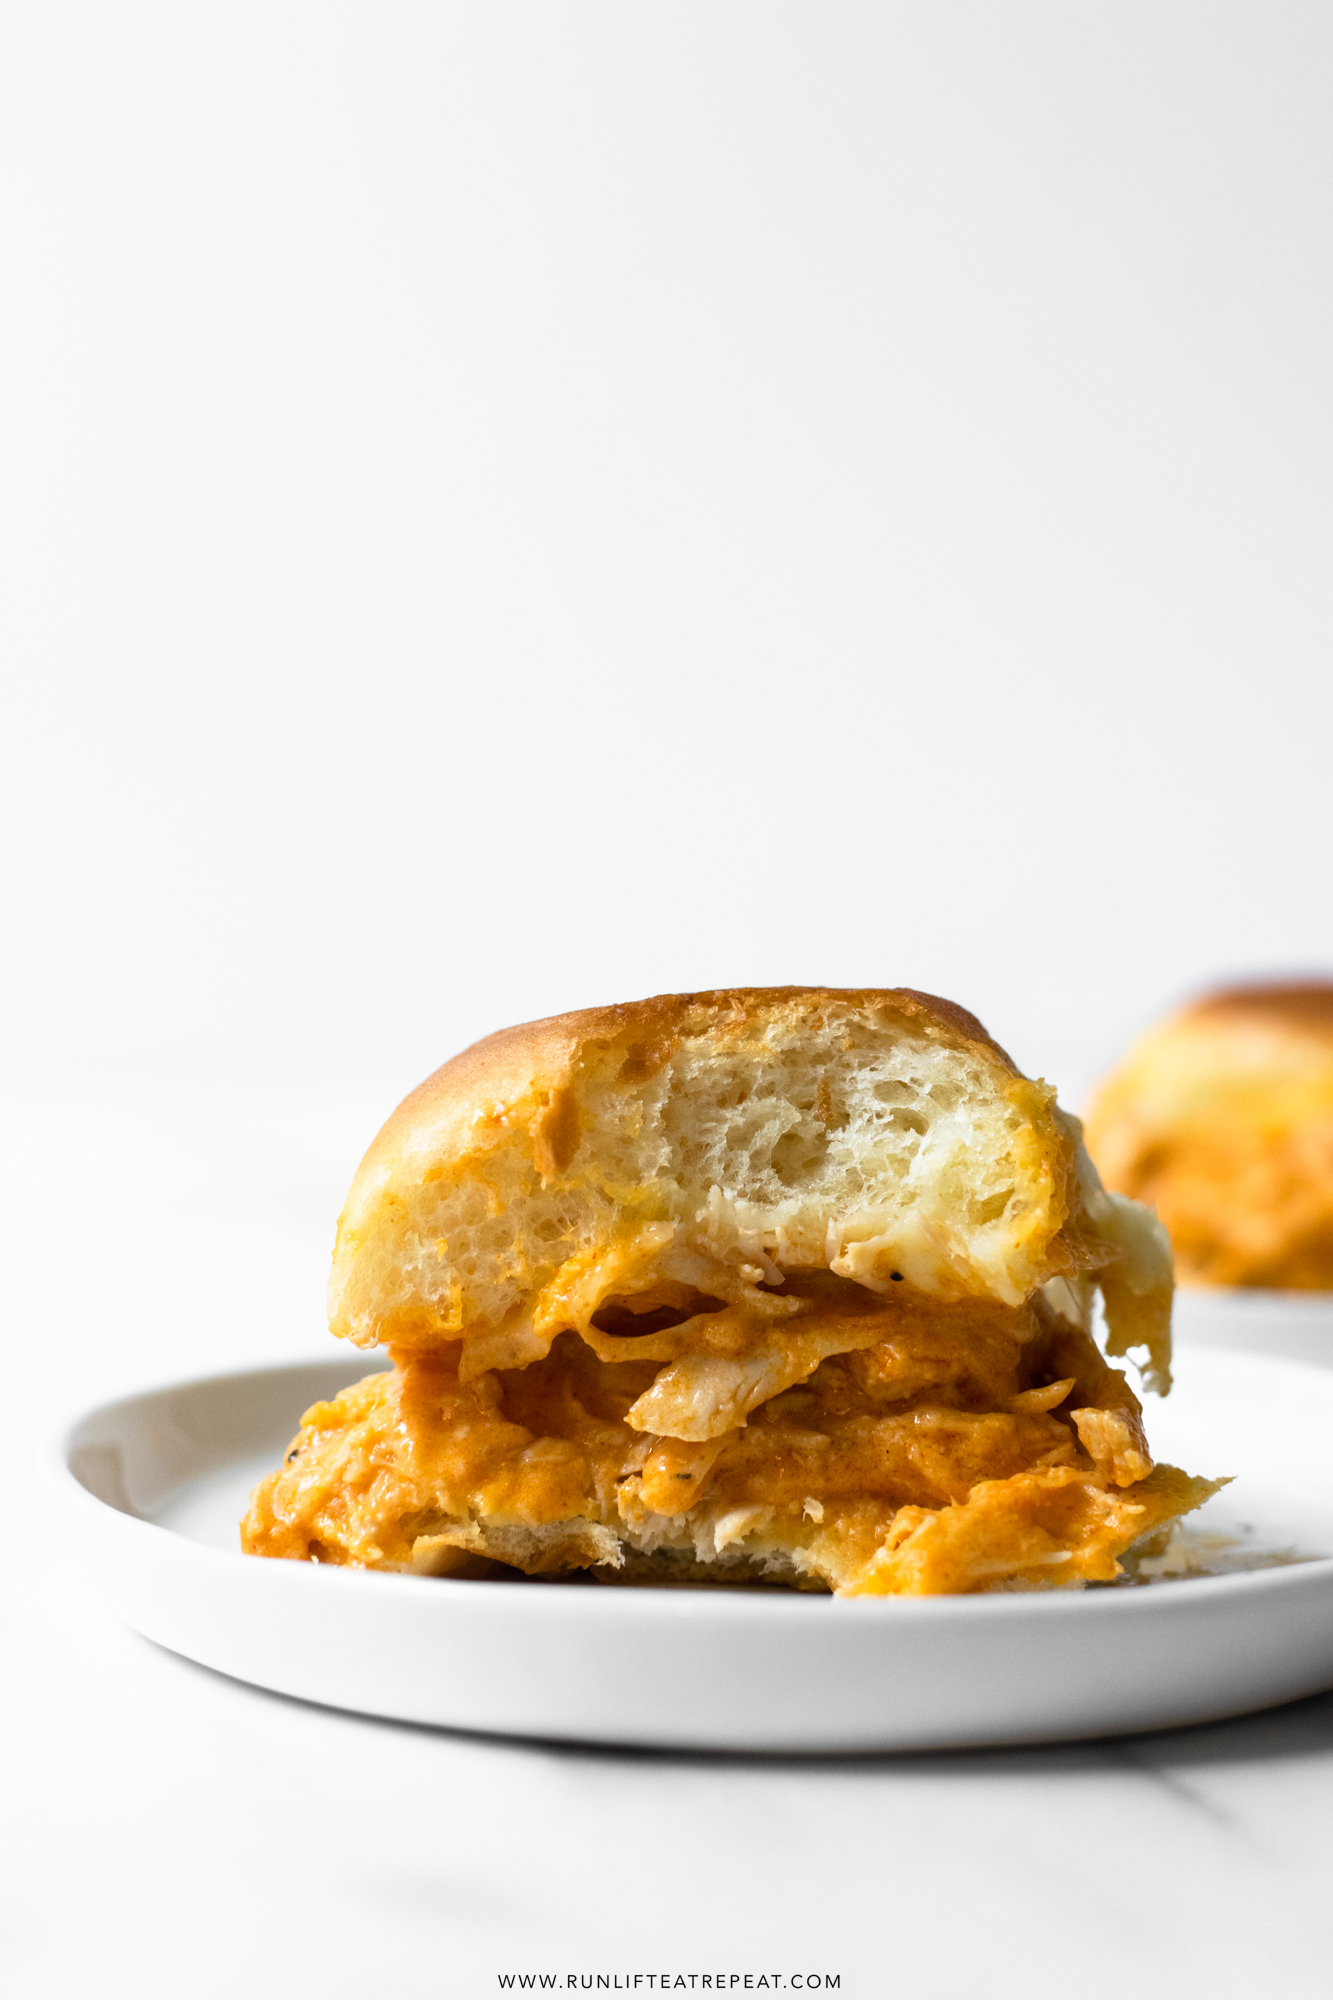 These slow cooker buffalo chicken sliders are an instant crowd-pleaser. Toss the ingredients together in a slow cooker and let it do 99% of the work for you! Your guests will be coming back for more— perfect for game days!